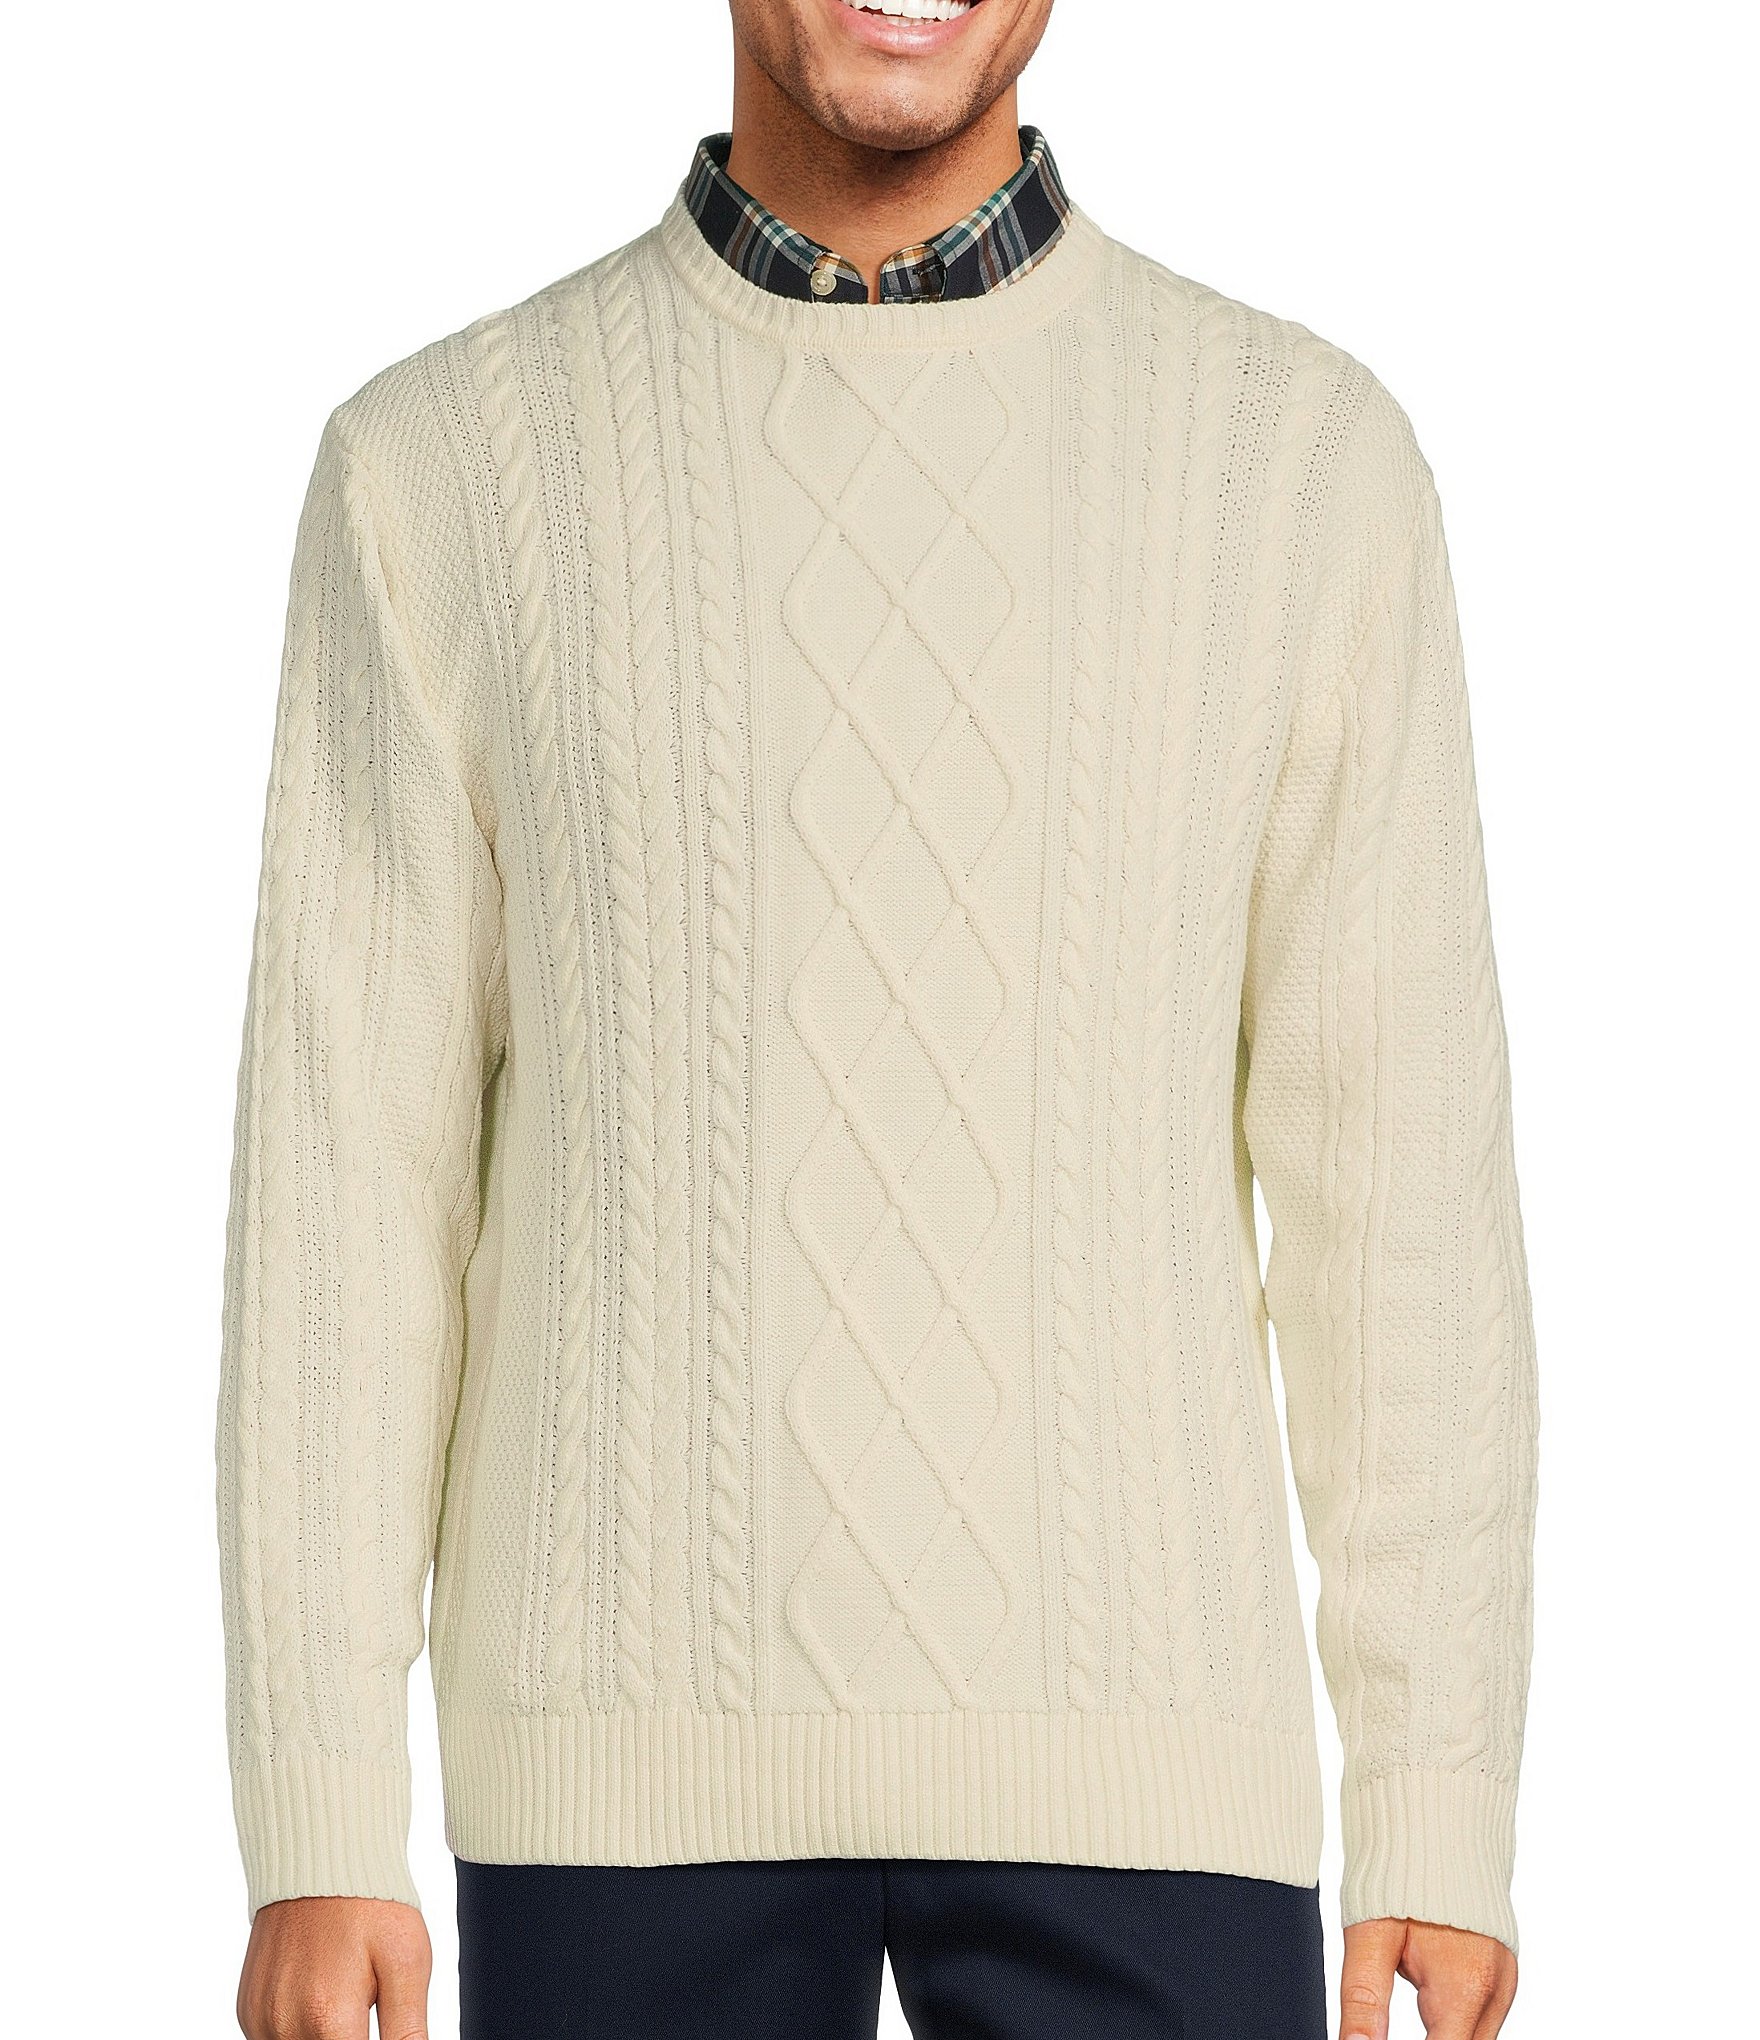 Roundtree & Yorke Long Sleeve Solid Cable Knit Crew Sweater | Dillard's